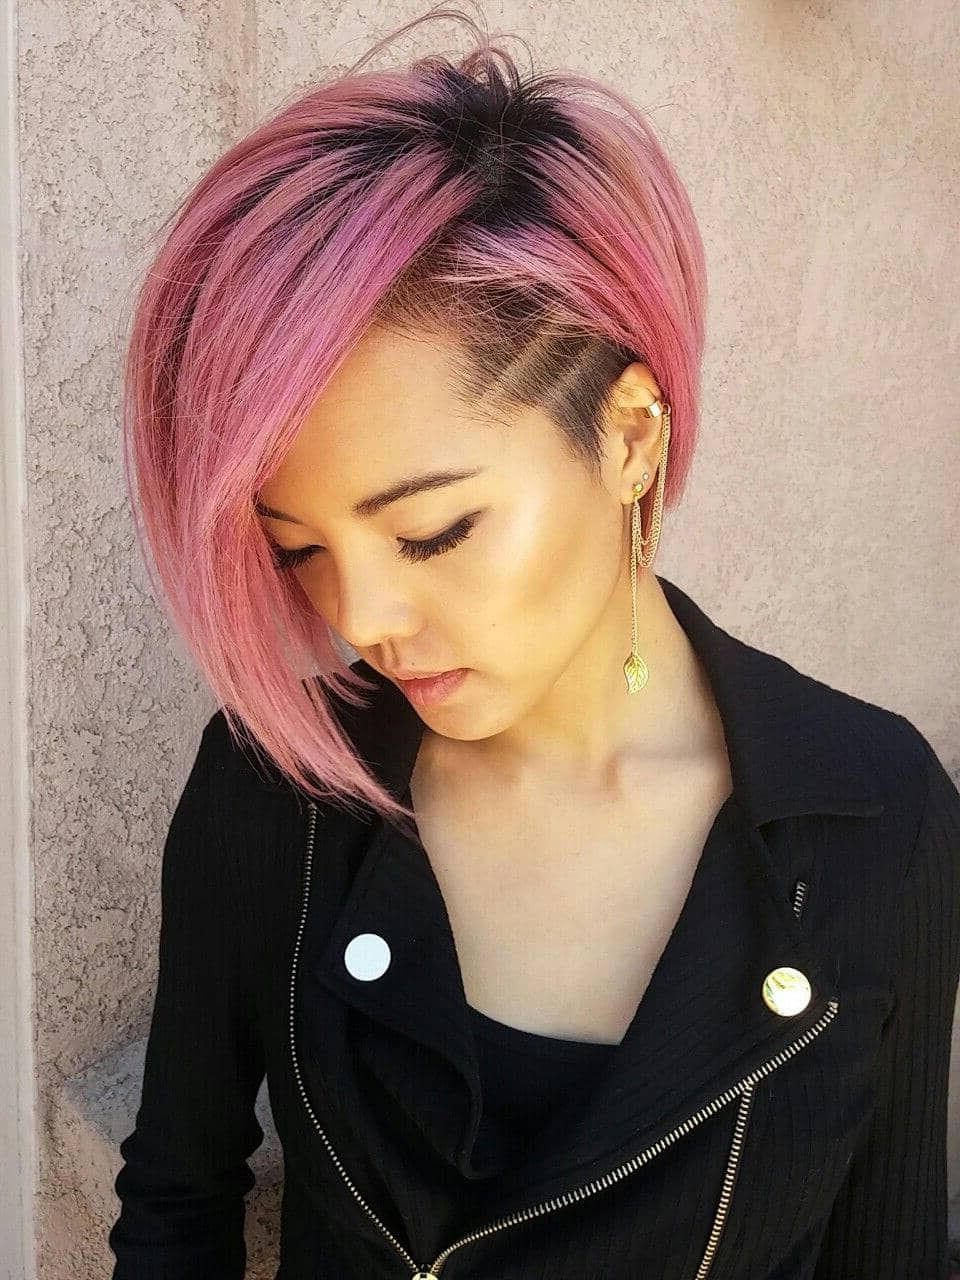 50 Pixie Haircuts You'll See Trending In 2018 Regarding Edgy Pixie Haircuts With Long Angled Layers (View 2 of 20)